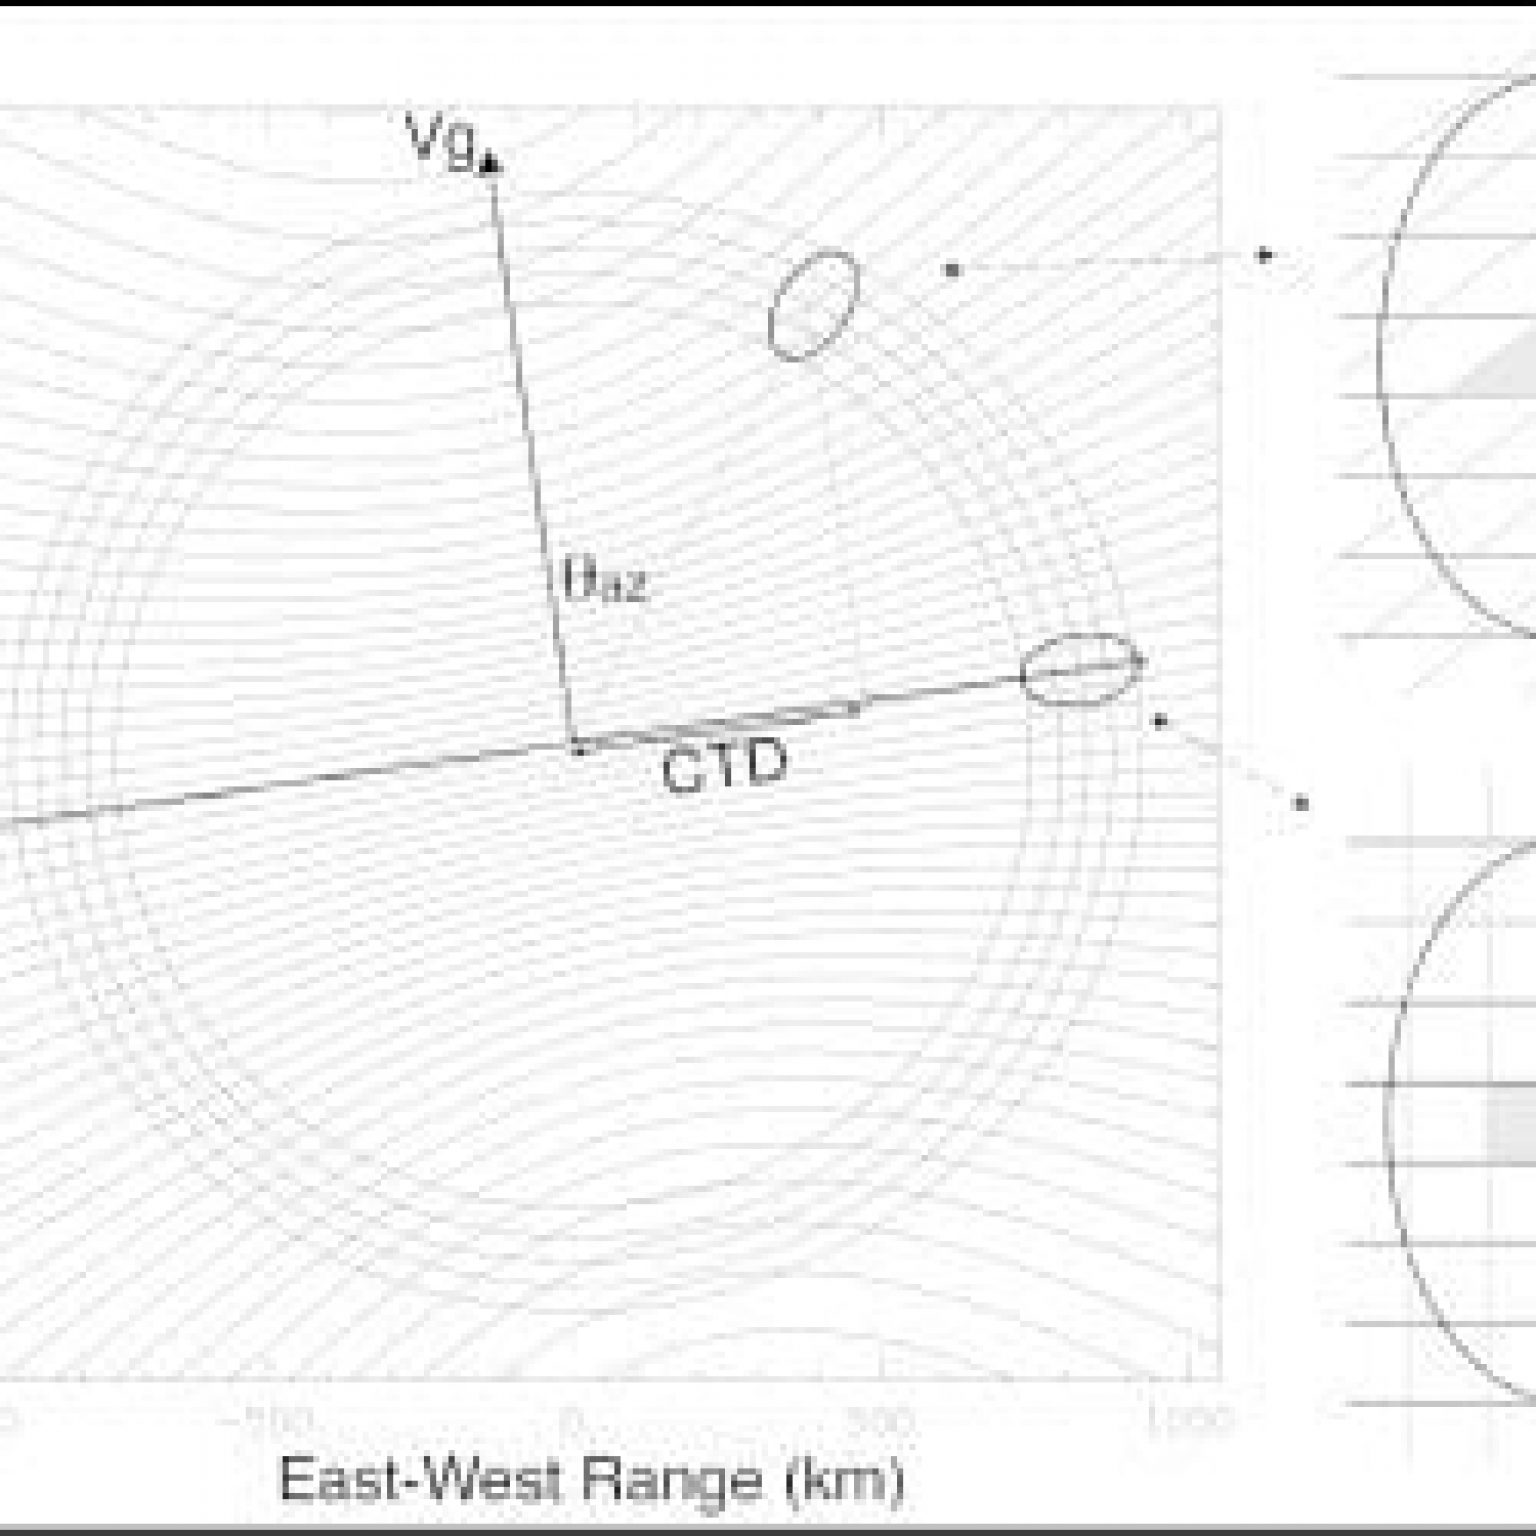 This panel illustrates the radar-measurement geometry showing the range and Doppler contours. The real aperture radar footprint ellipse is shown at two representative azimuth-scan angles. 